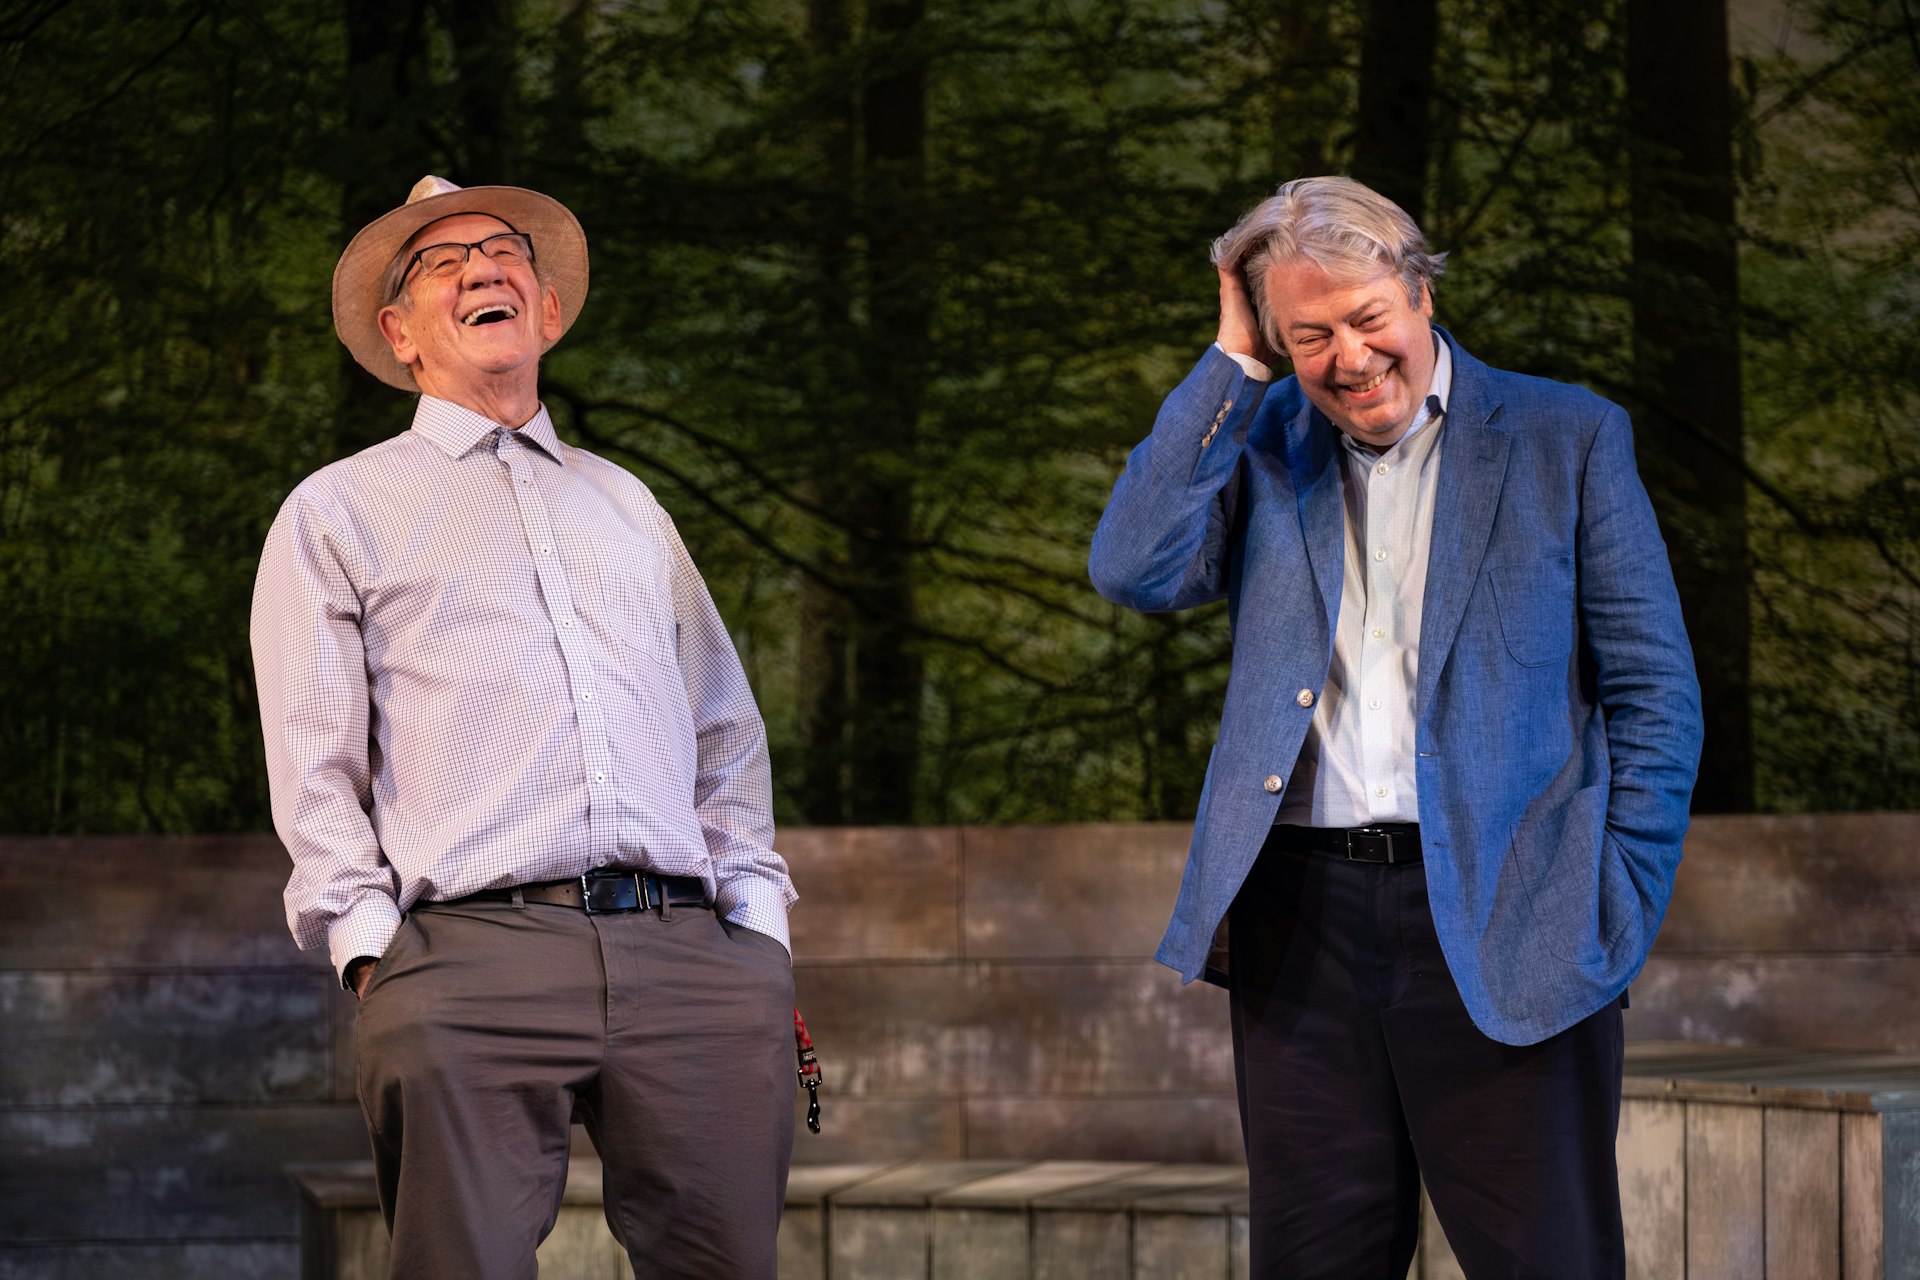 Ian McKellen and Roger Allam in the play “Frank and Percy”